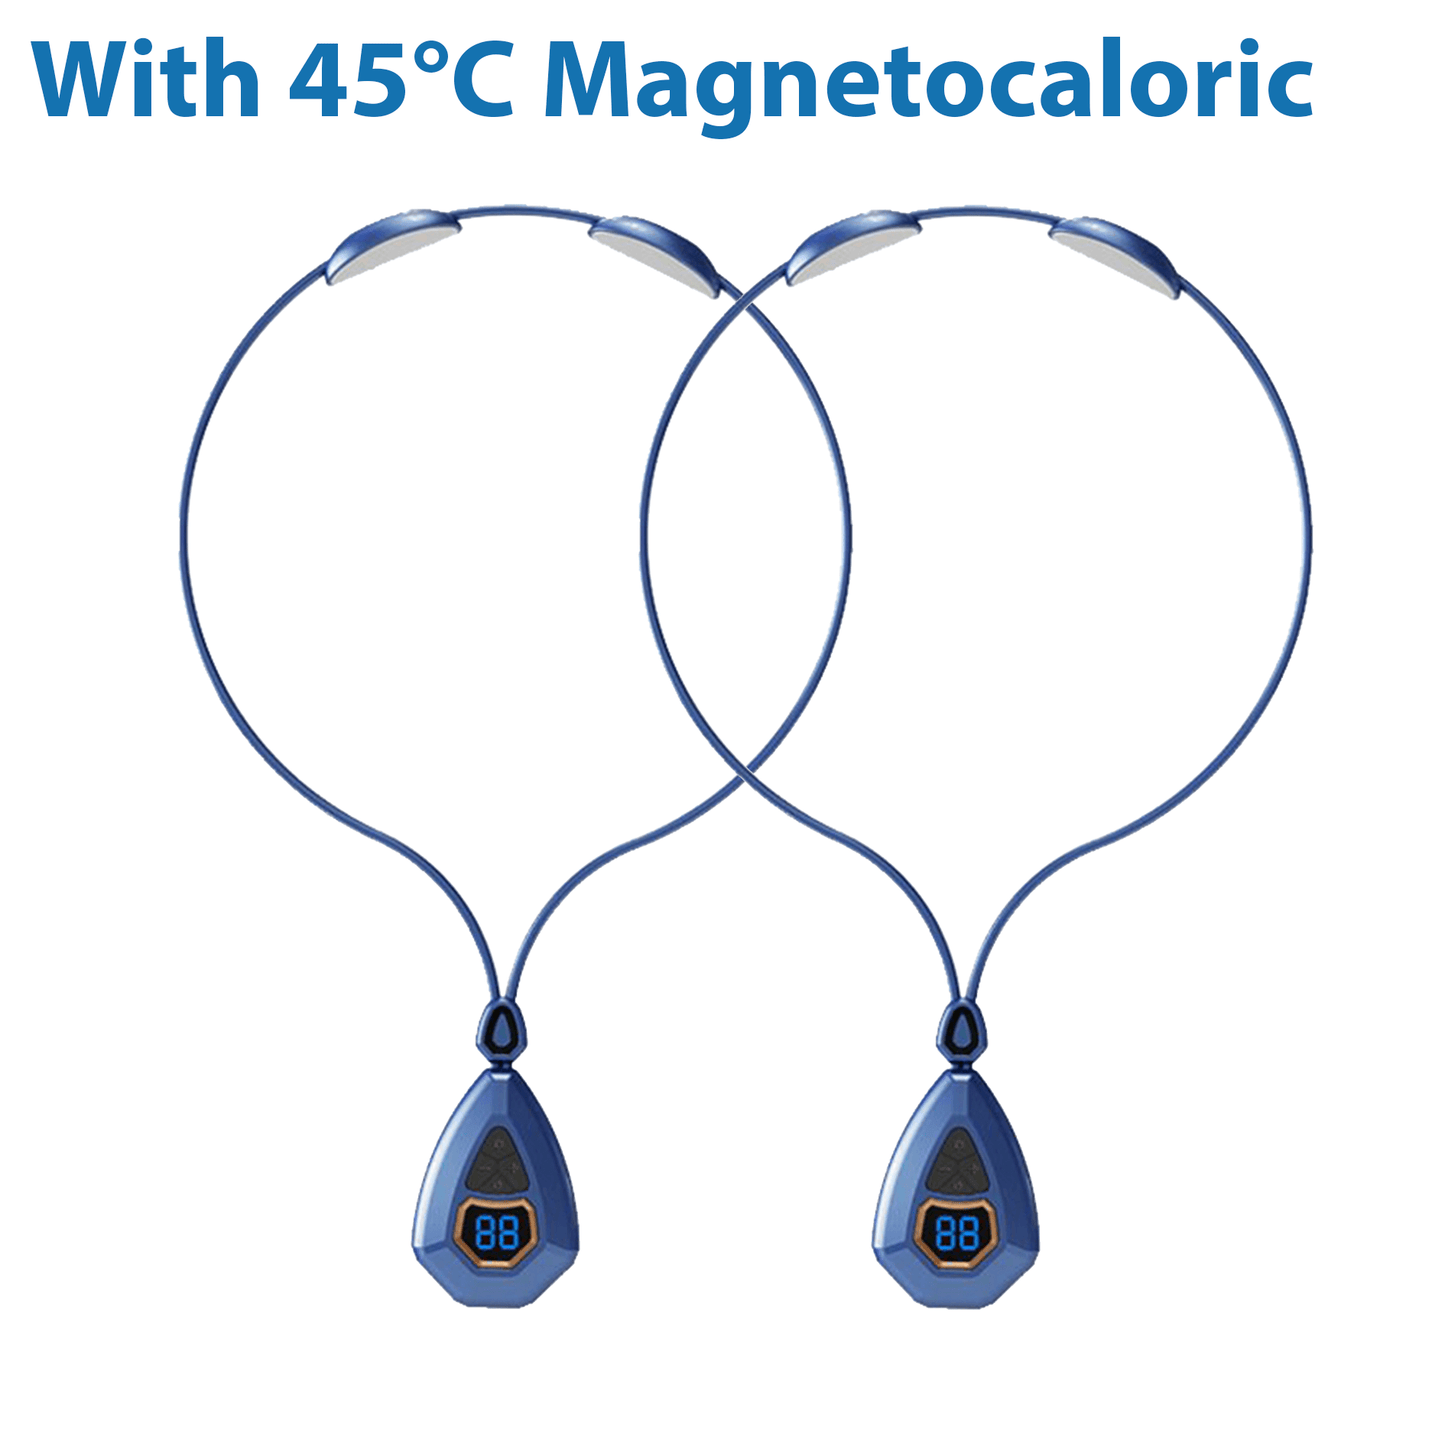 EMS Portable Lymphatic Relief Neck Massager JC 1688 2PCS BLUE With 45°C Magnetocaloric 